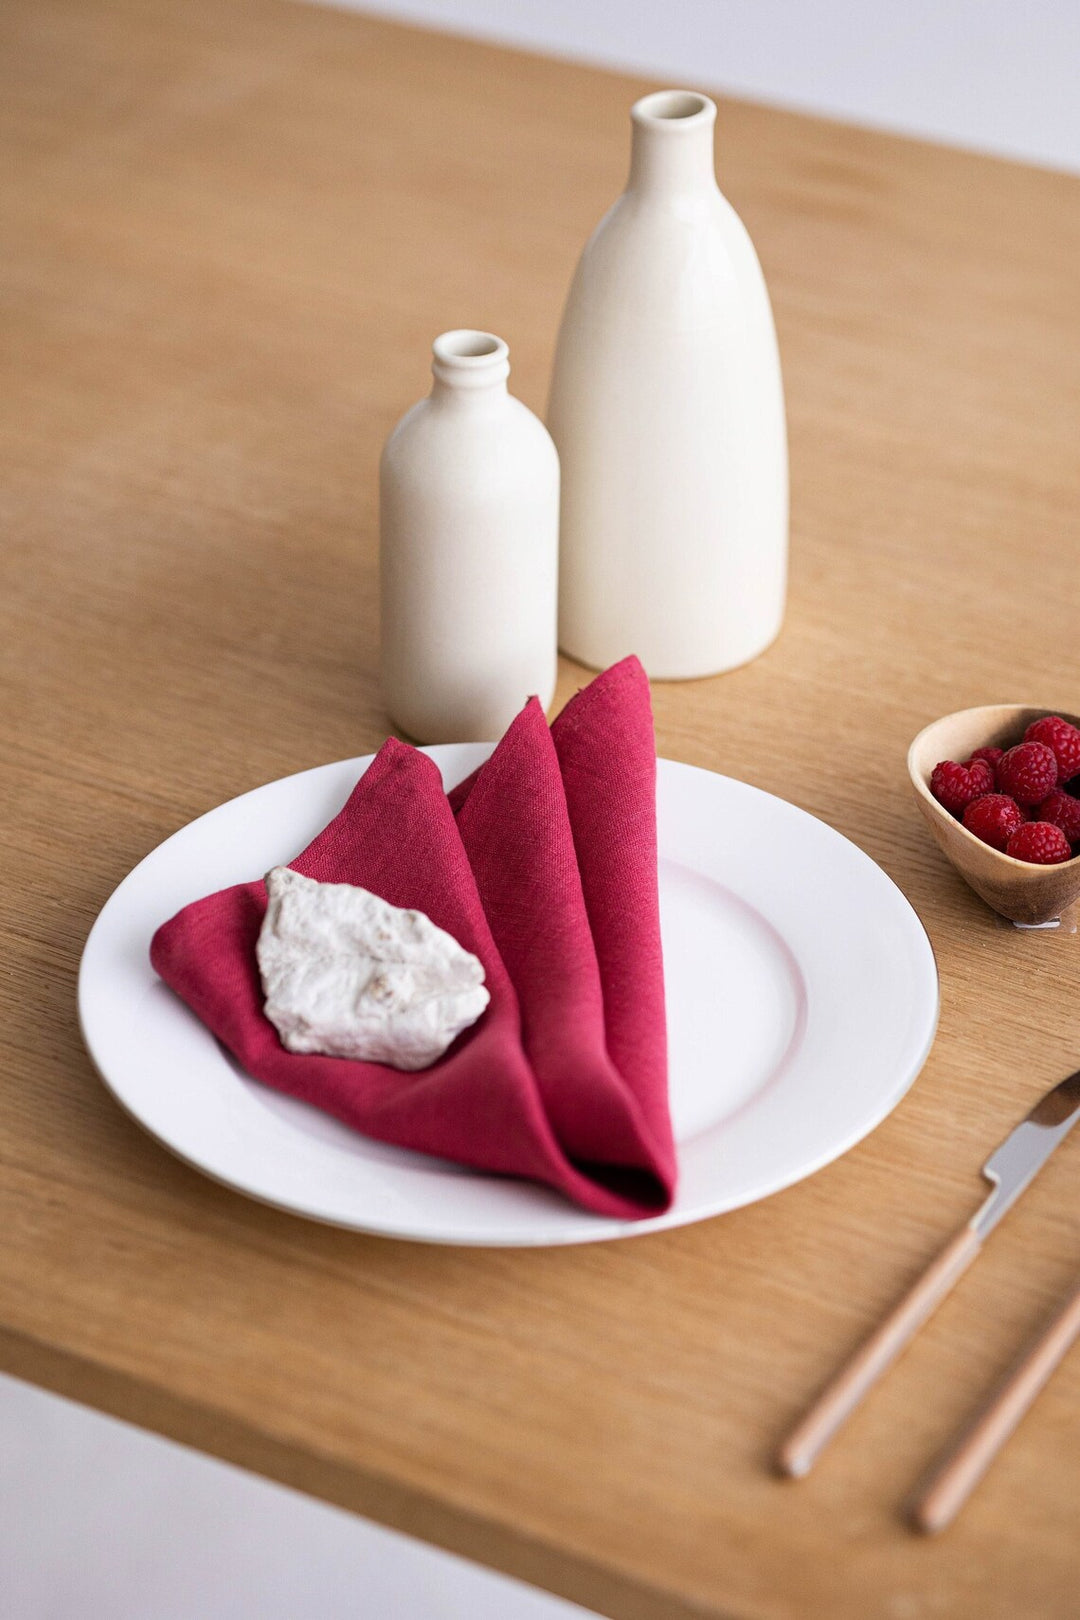 Linen Napkins Set Of 2 In Raspberry Color On Table - Daily Linen